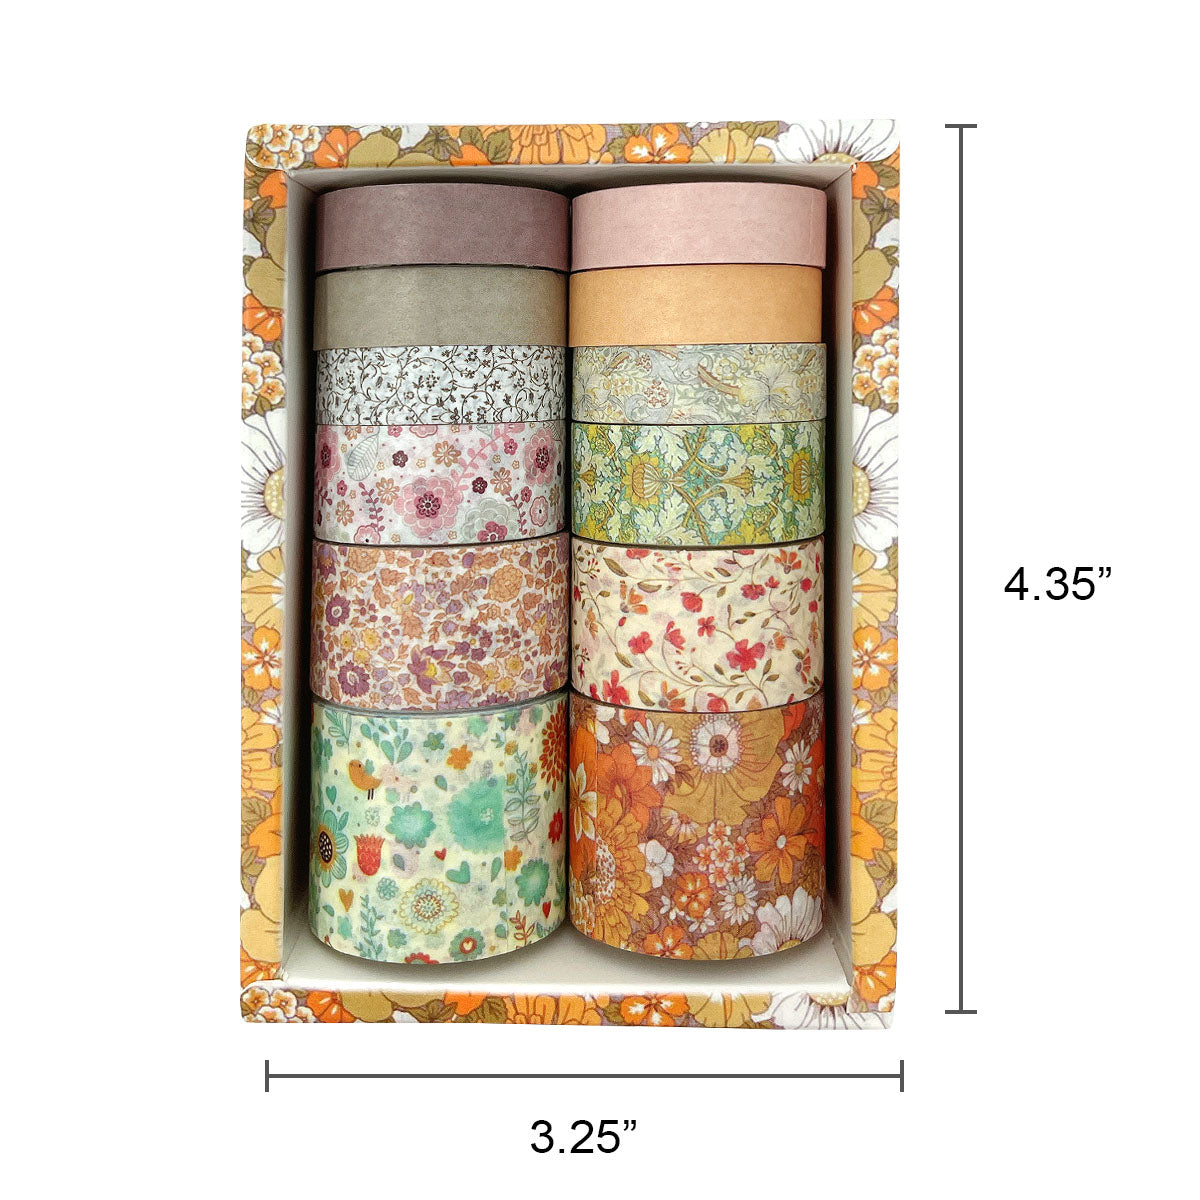 3PCS Washi Tape Set, Decorative Masking Tape for Scrapbooking, DIY Arts and  Crafts, Bullet Journal, Planner, Card Gift Wrapping 